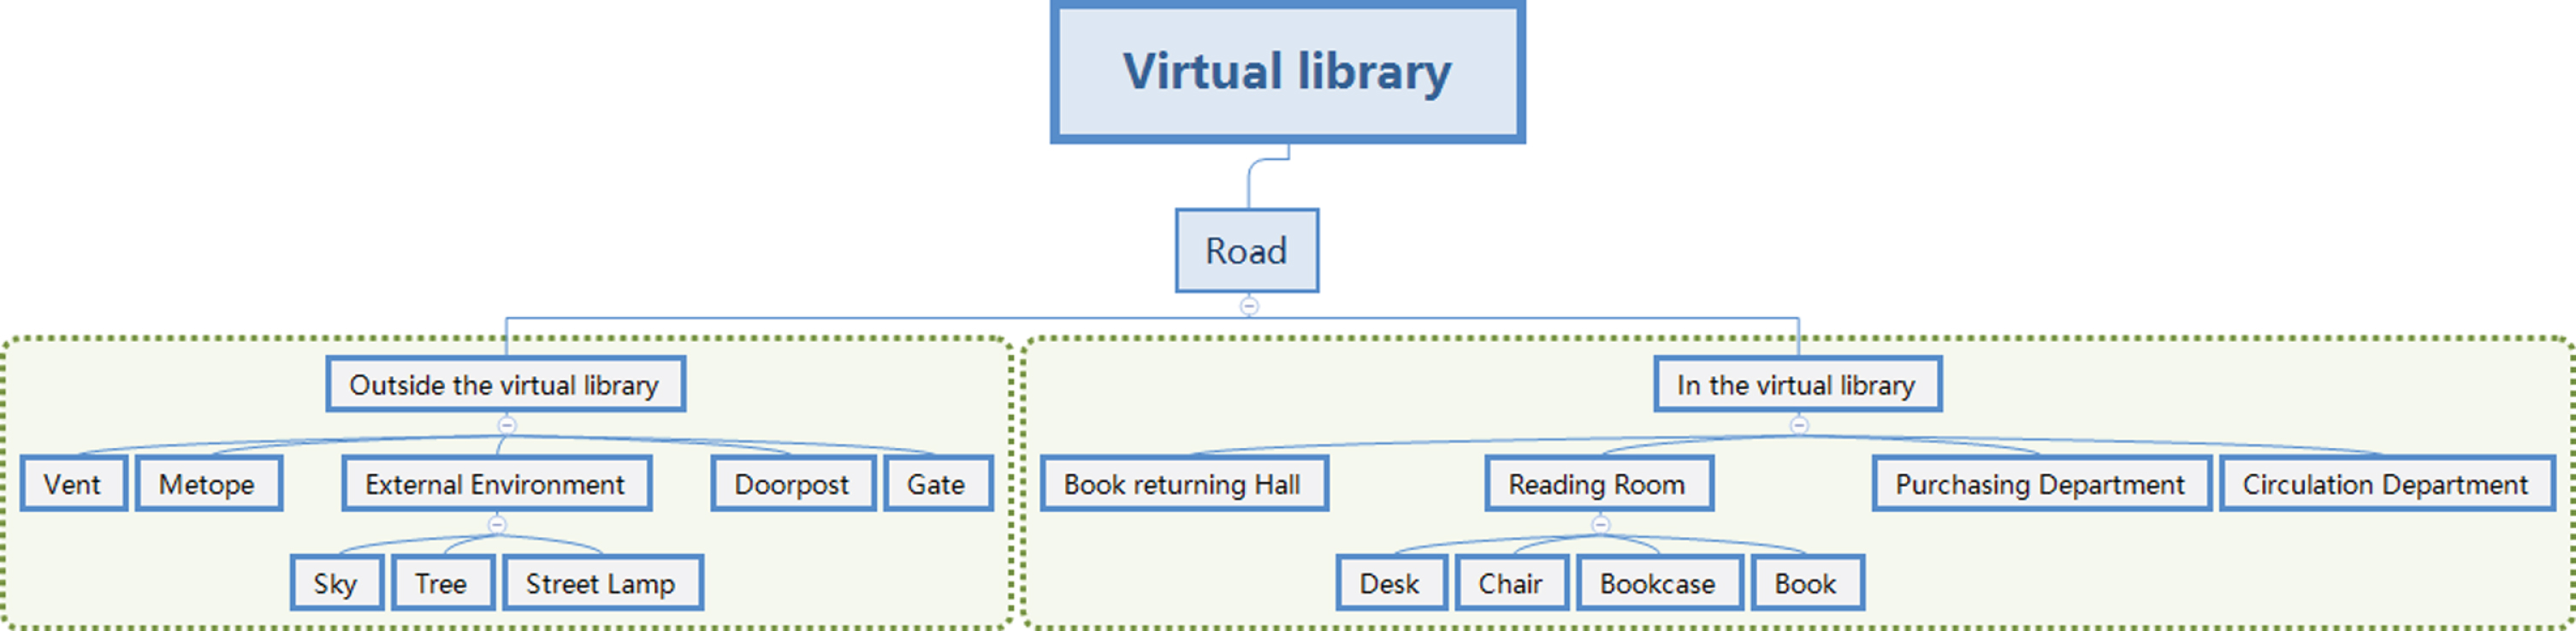 scene structure of Virtual Library.